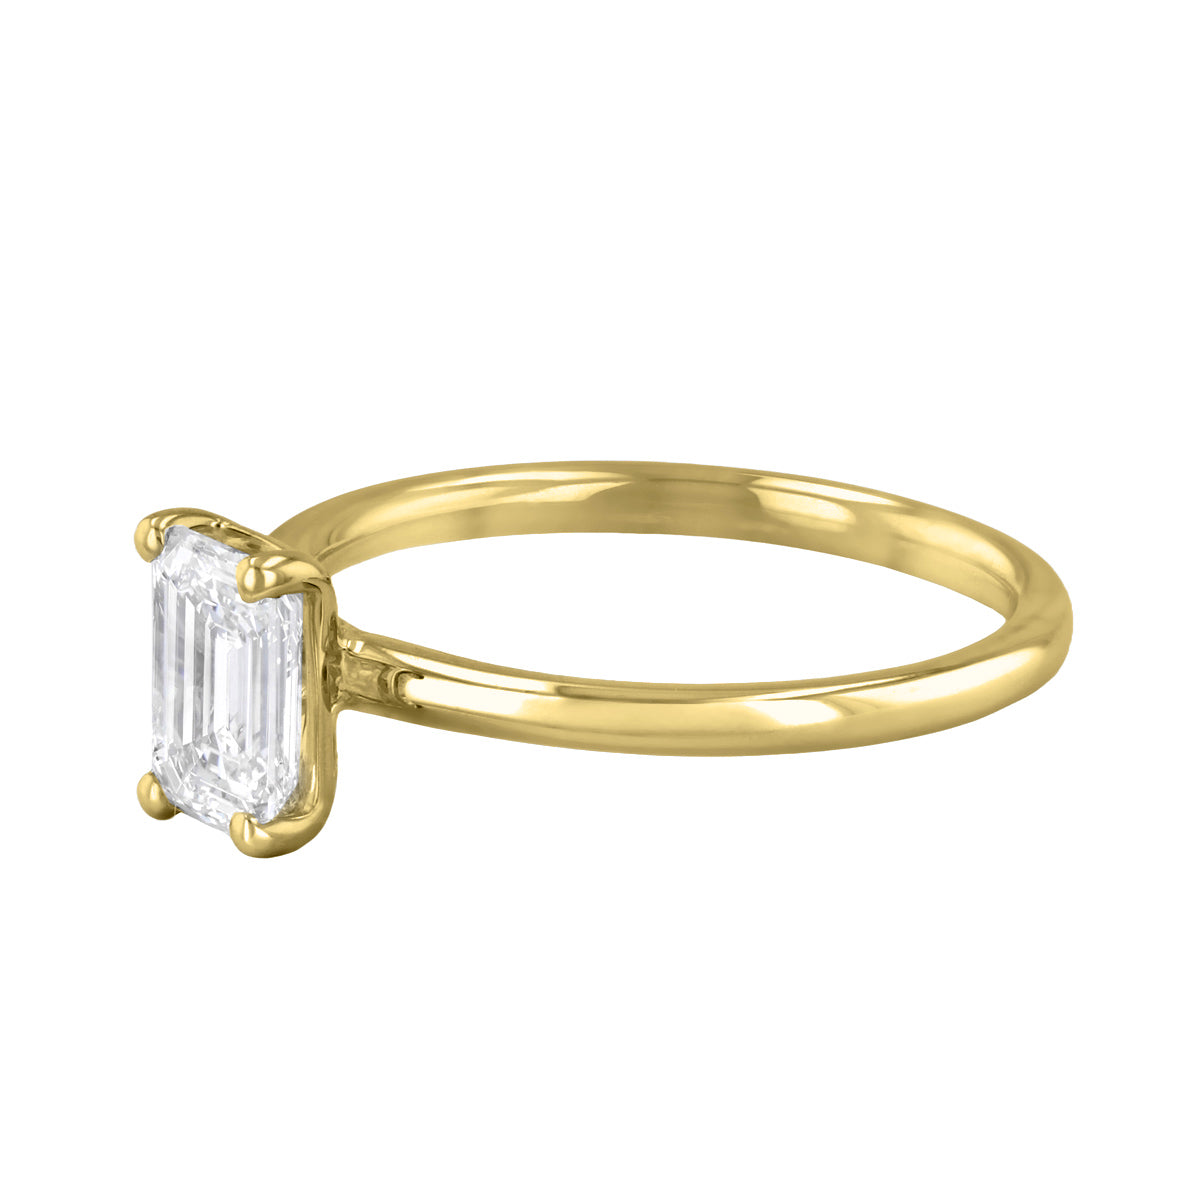 0-50ct-sofia-emerald-cut-solitaire-diamond-engagement-ring-18ct-yellow-gold